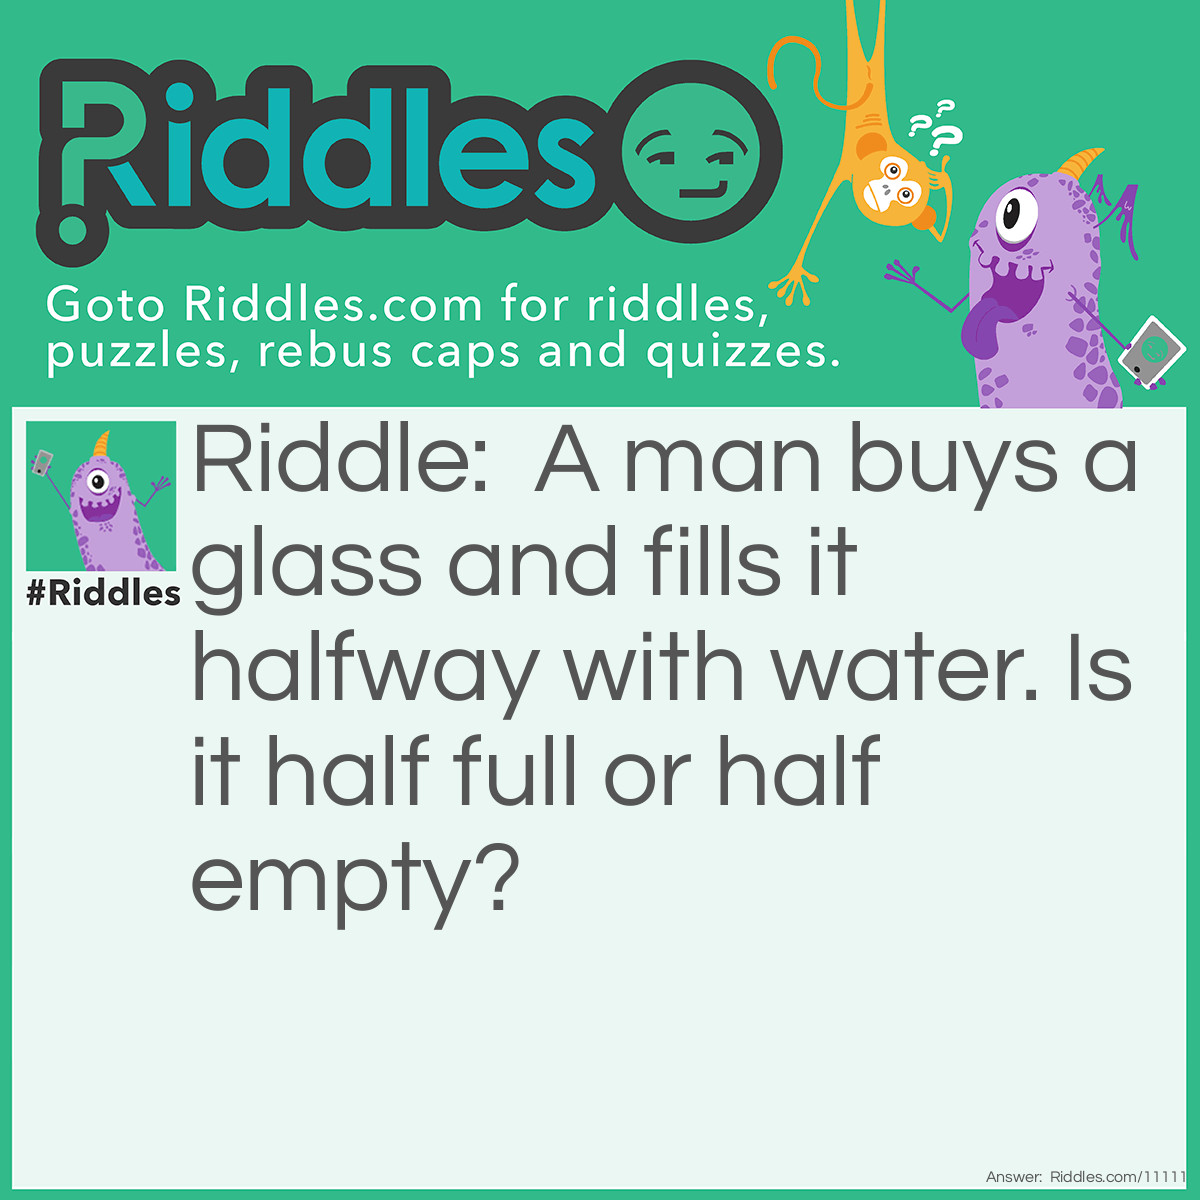 Riddle: A man buys a glass and fills it halfway with water. Is it half full or half empty? Answer: Half empty. Because it was empty to begin with, it was 2/2 empty, and now it is 1/2 empty.